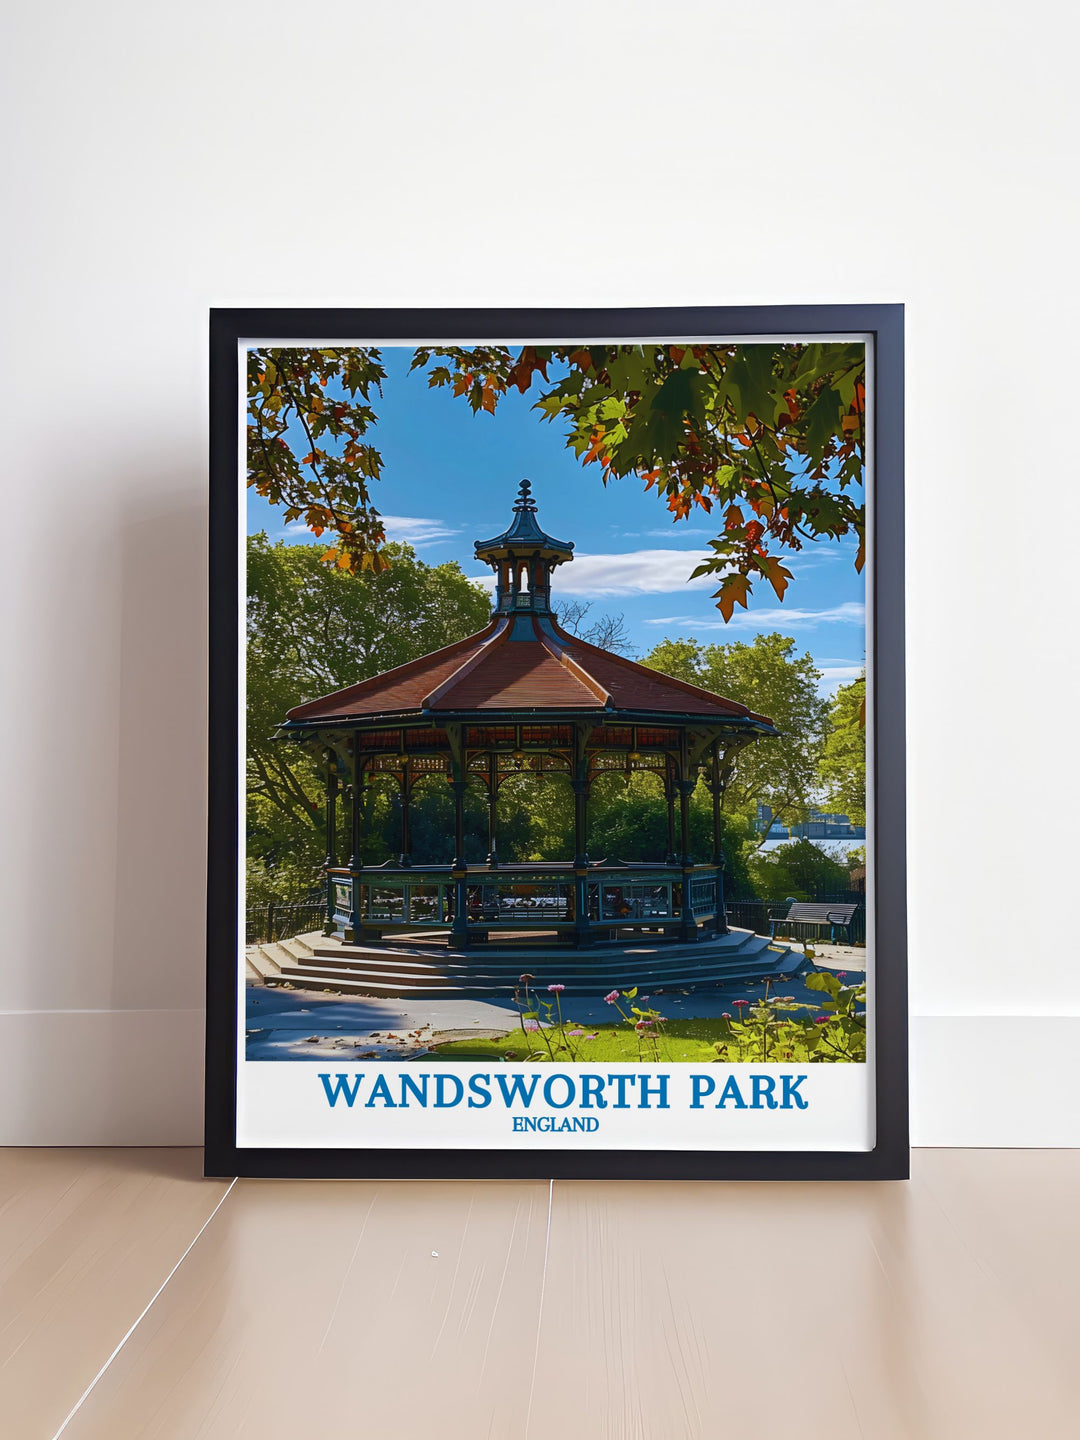 The historic bandstand of Wandsworth Park is depicted in this exquisite print, highlighting the parks Edwardian design and lush greenery. Perfect for history enthusiasts and lovers of Londons green spaces, this artwork showcases the timeless appeal of Wandsworth Park, making it a standout addition to any art collection or decor.